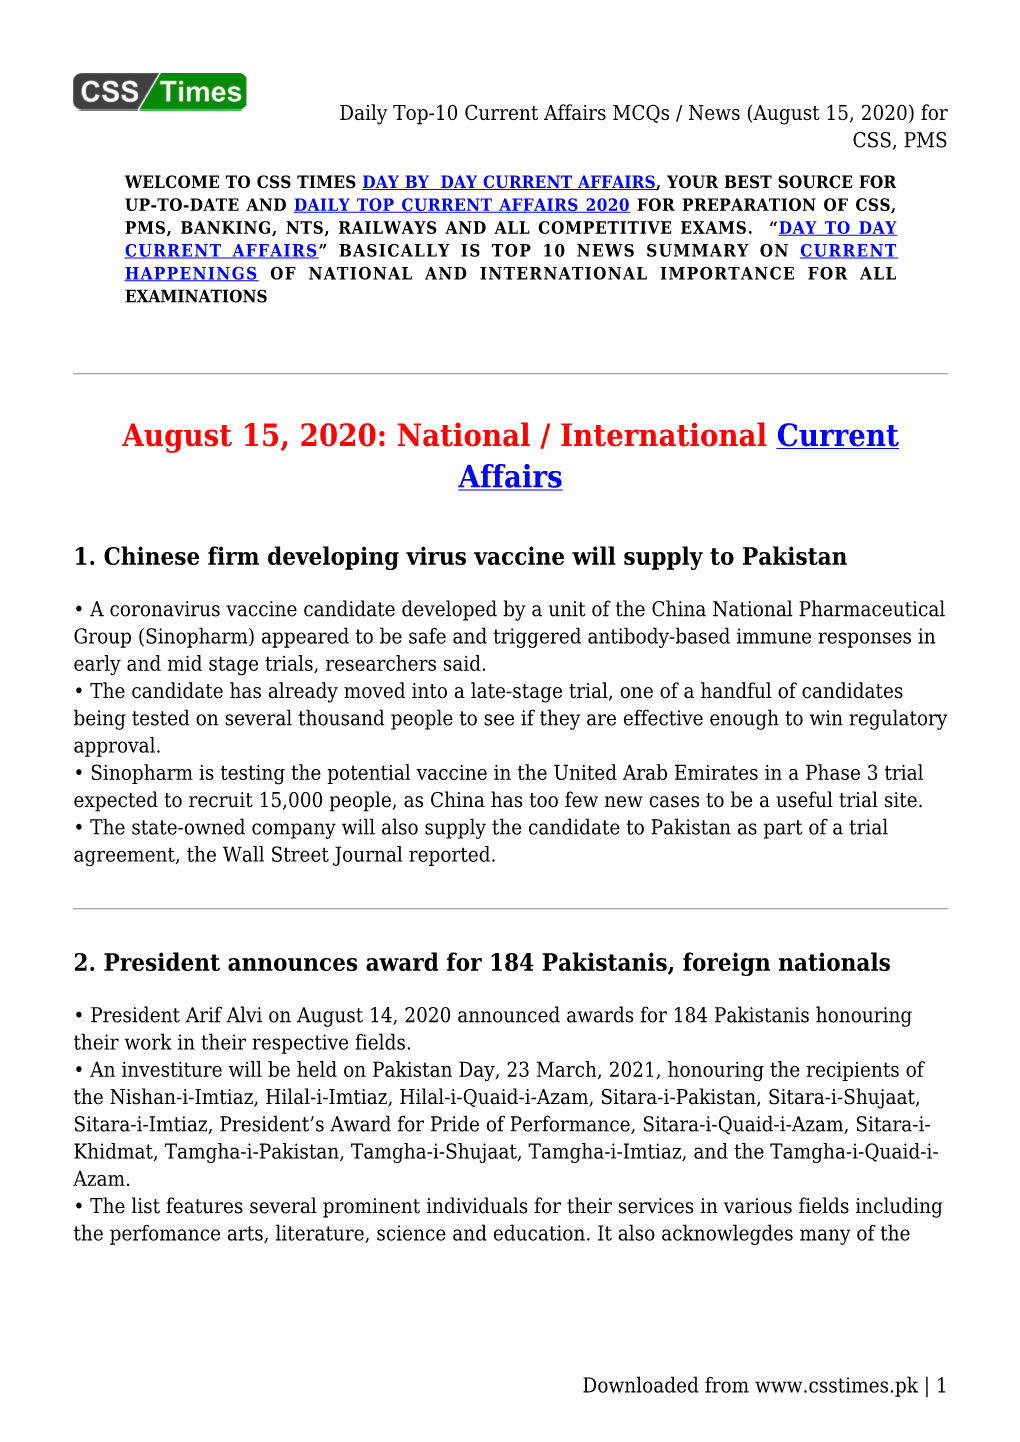 Daily Top-10 Current Affairs Mcqs / News (August 15, 2020) for CSS, PMS